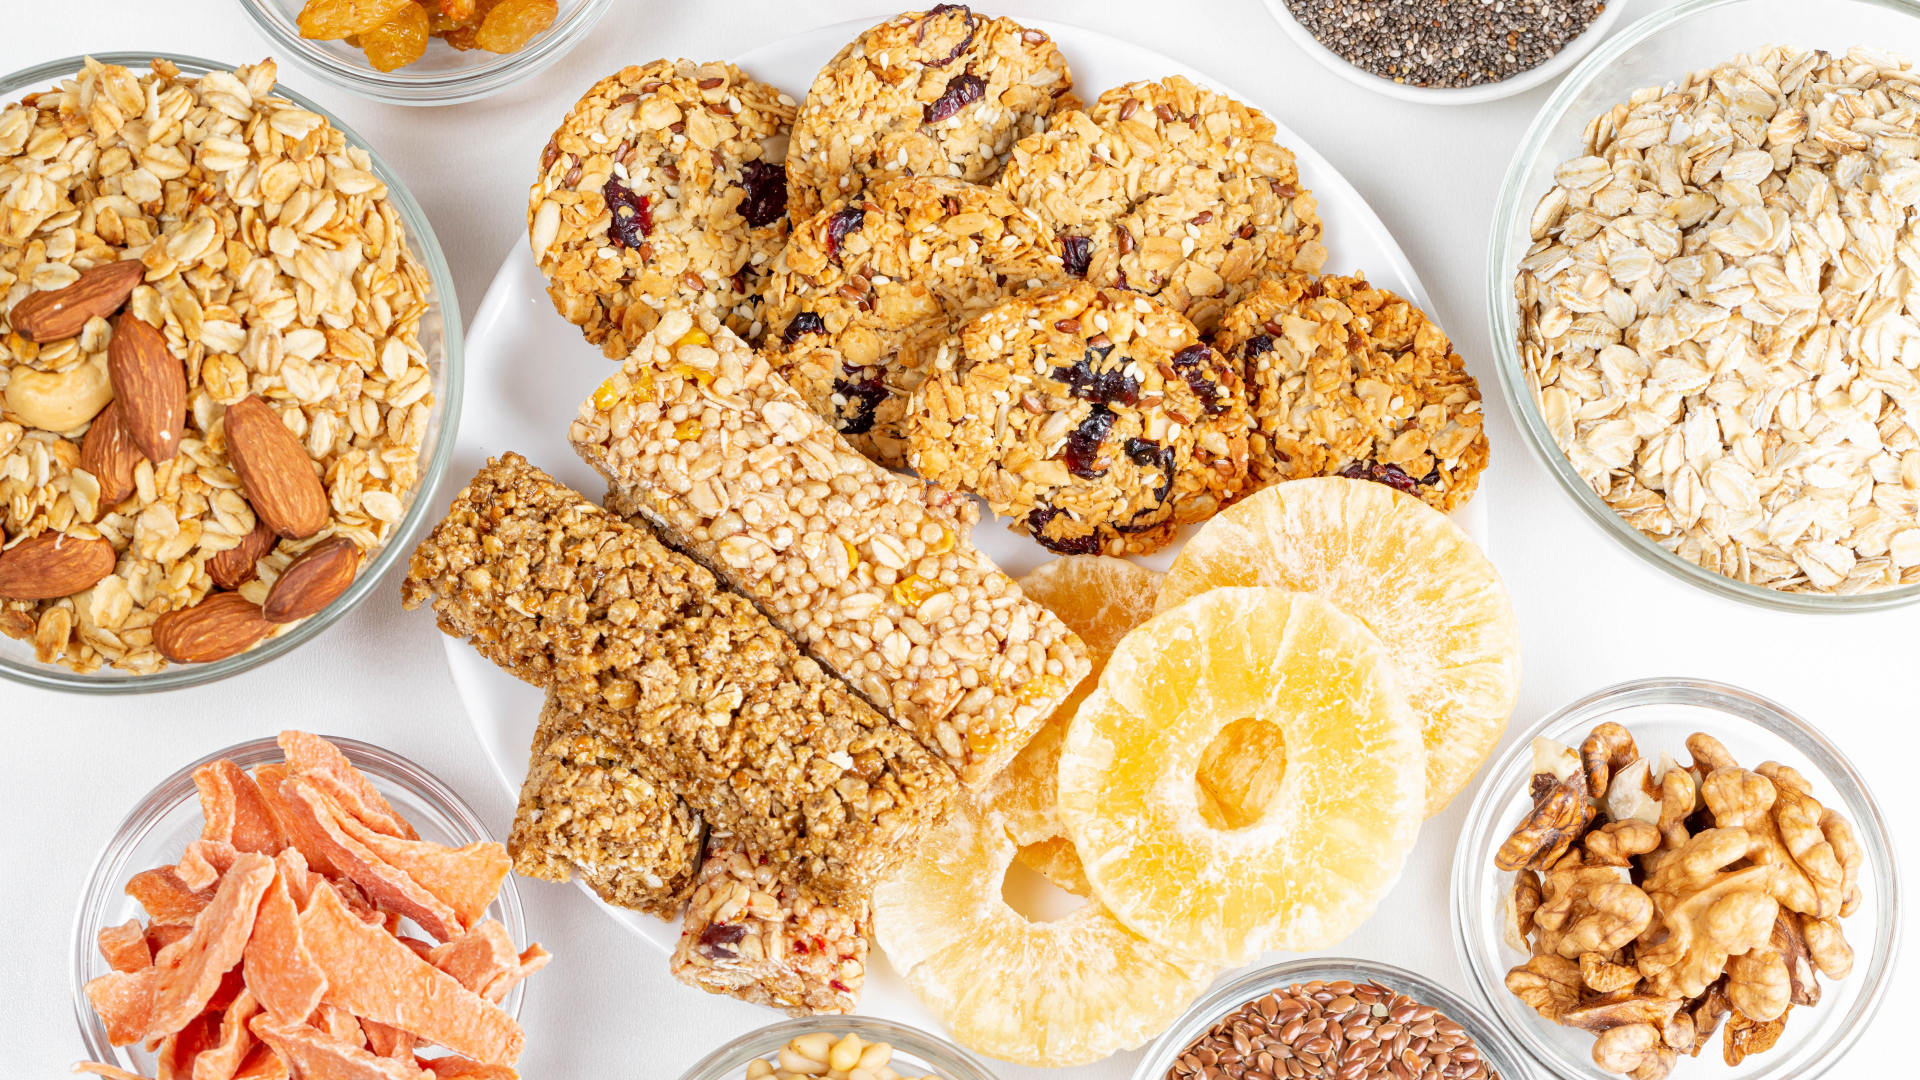 Cookies, dried fruits and cereals on the table